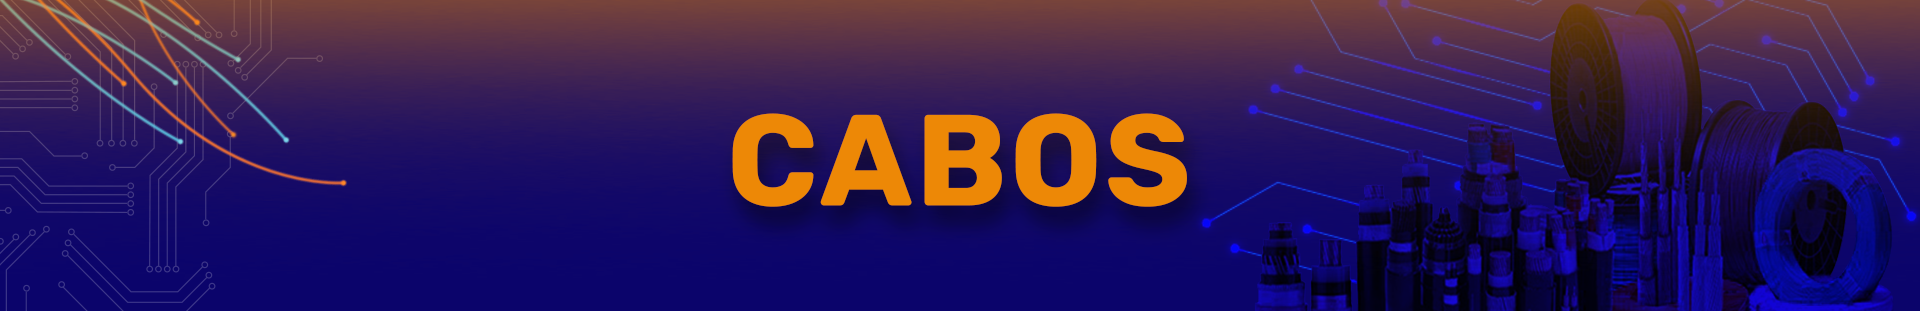 banner-cabos